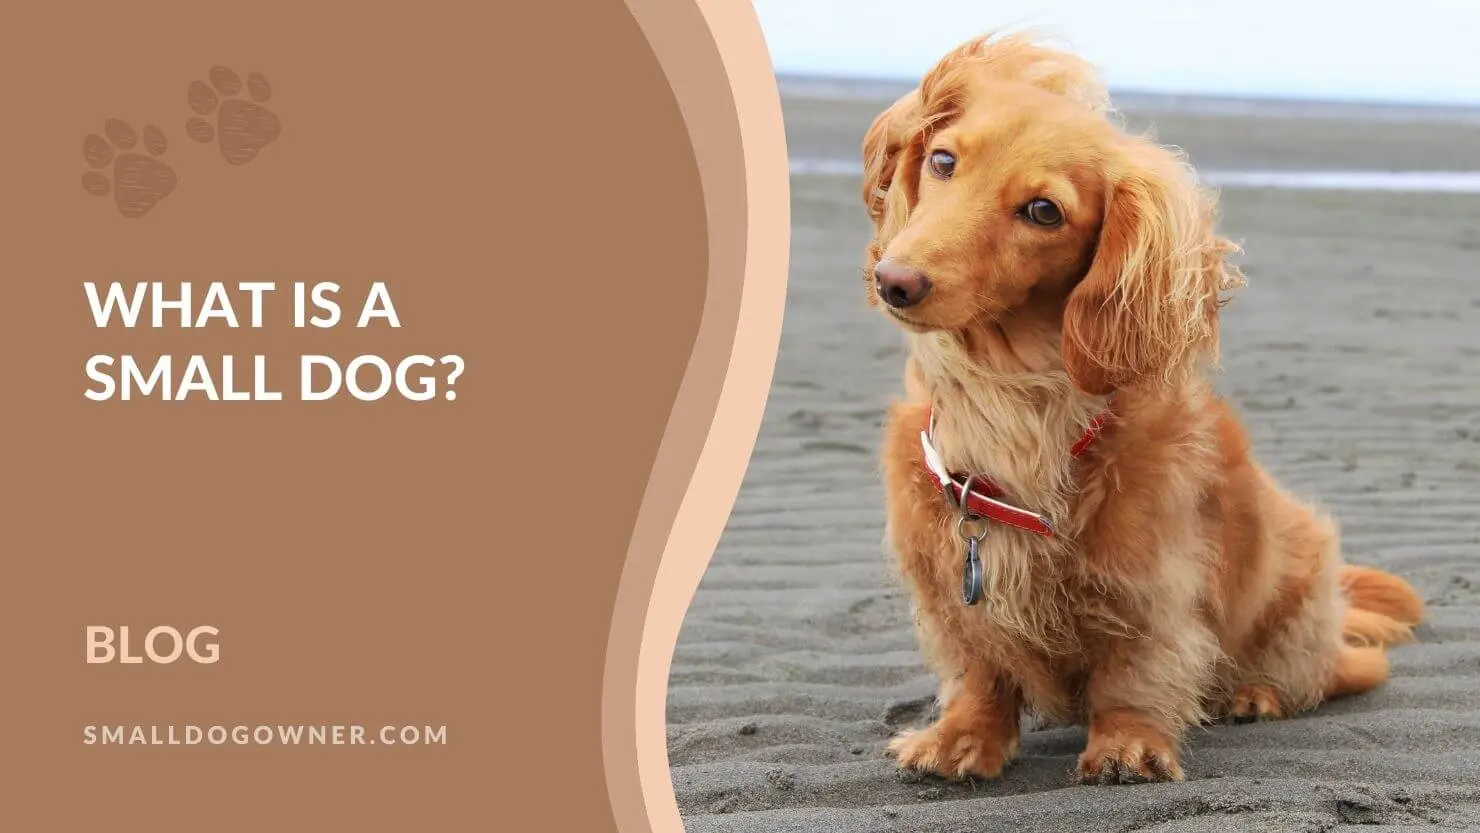 What is a small dog?